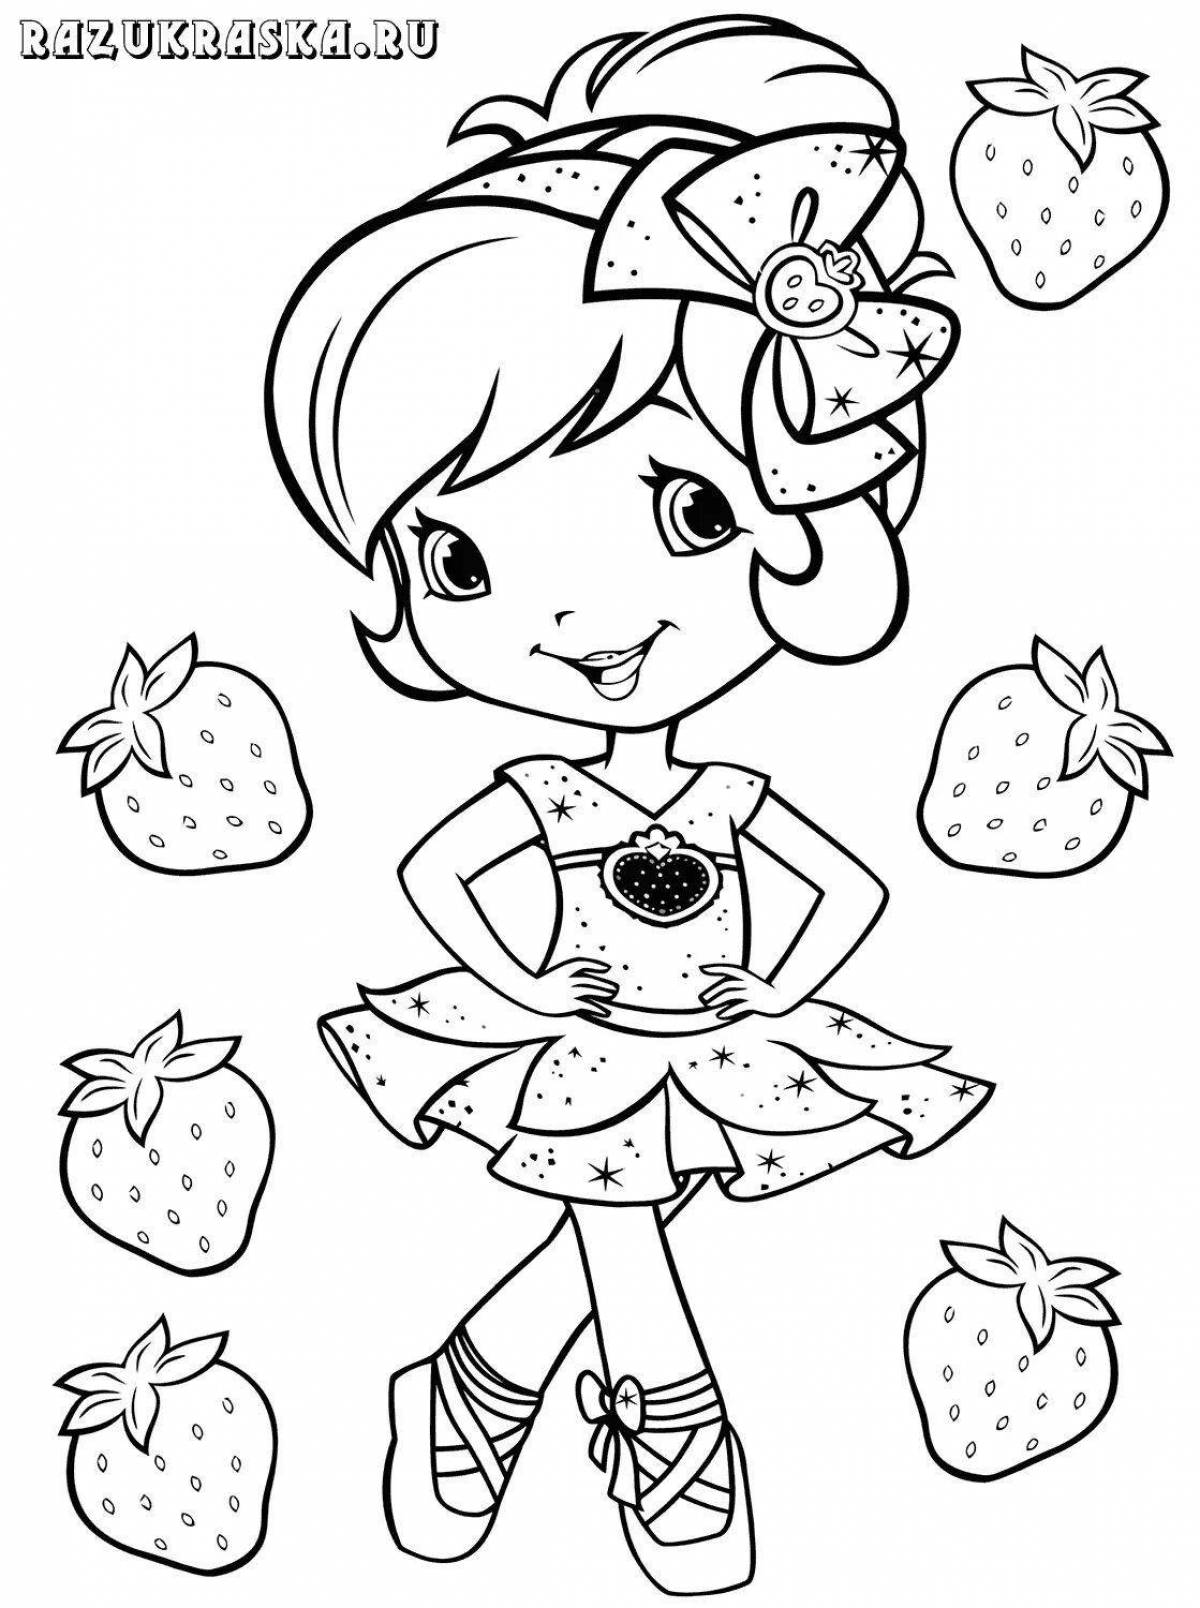 Exquisite strawberry coloring book for kids